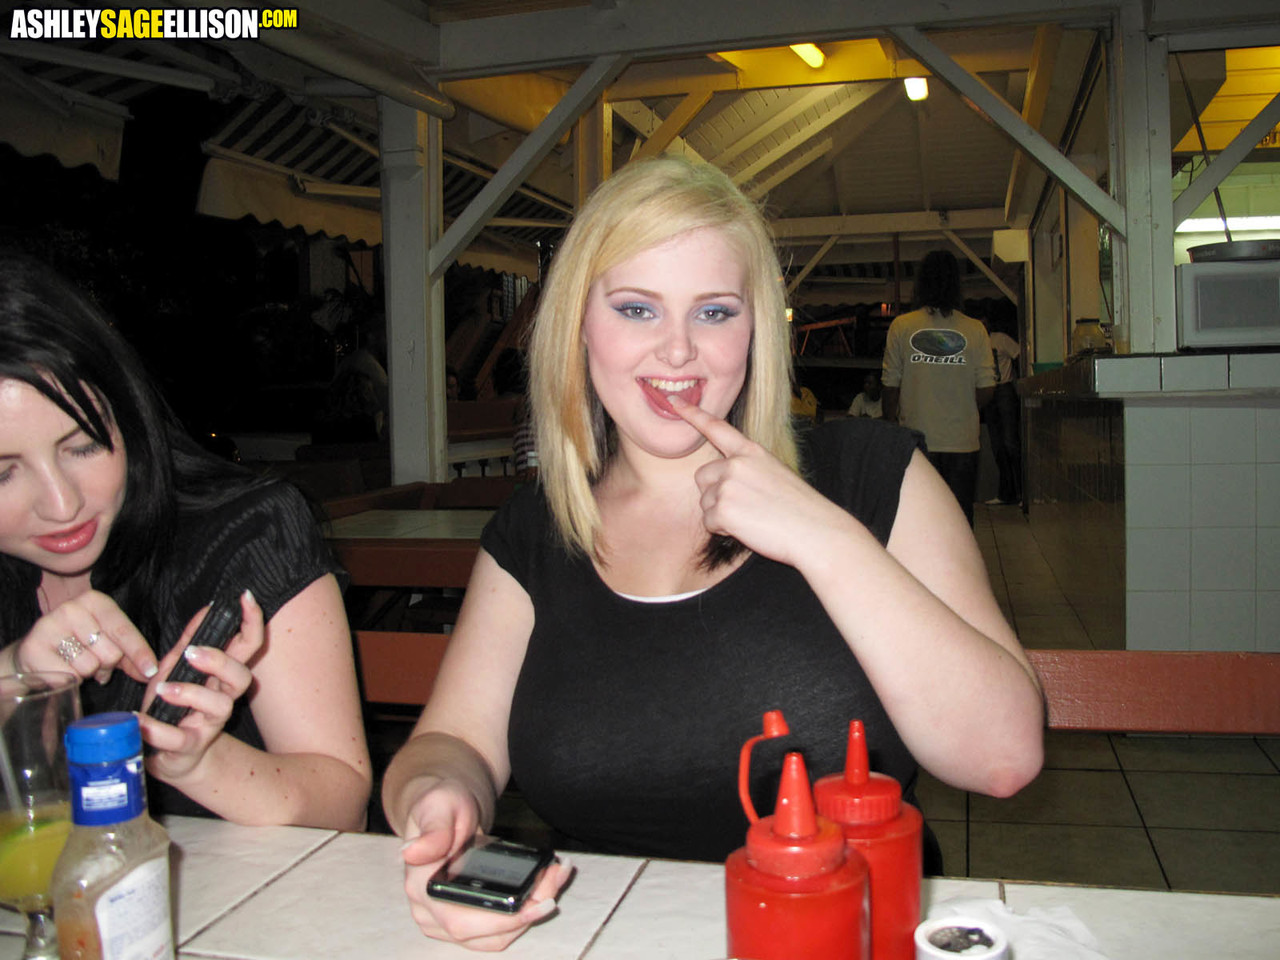 Fat chick Ashley Sage Ellison and her busty gf go out on the town porn photo #426376436 | Ashley Sage Ellison Pics, Ashley Sage Ellison, Karina Hart, BBW, mobile porn